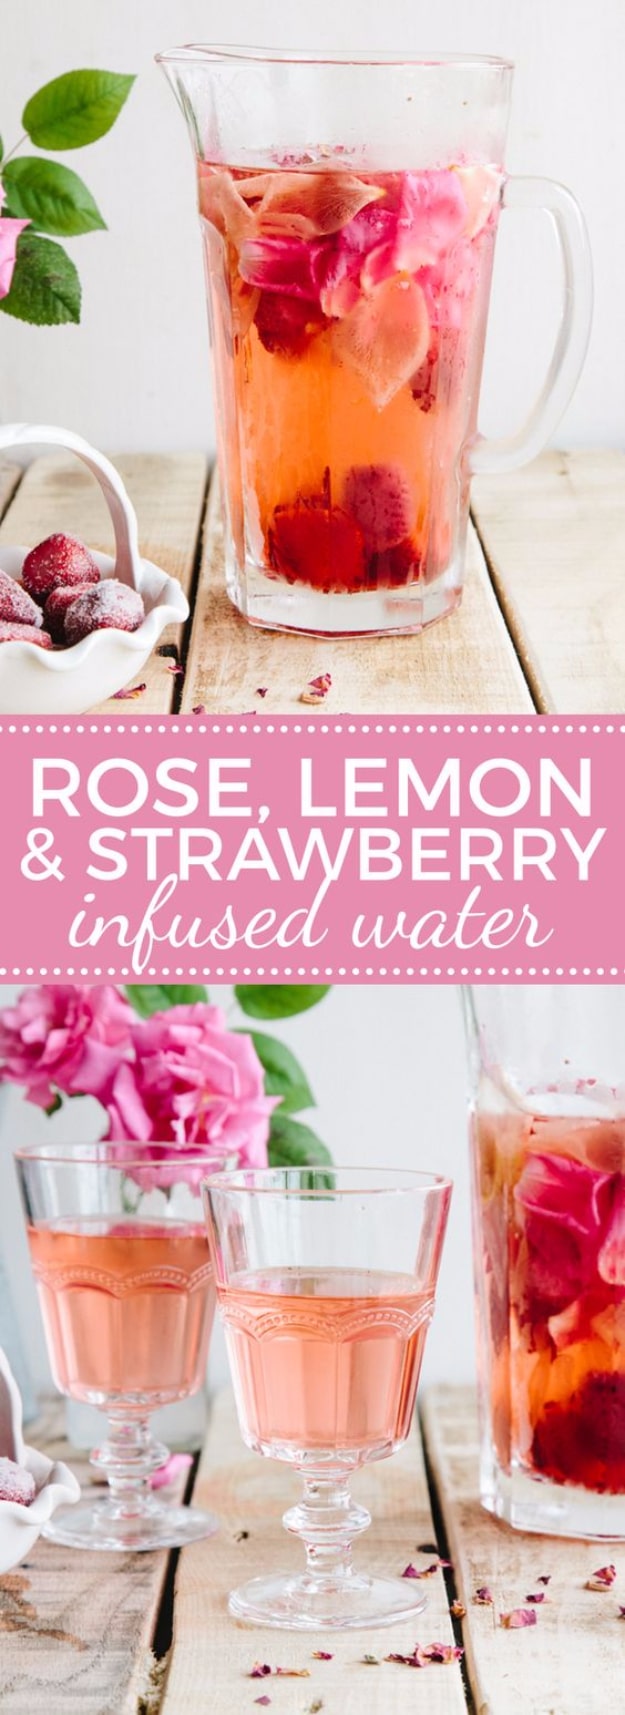 Best DIY Detox Waters and Recipes - Rose Lemon And Strawberry Infused Water - Homemade Detox Water Instructions and Tutorials - Lose Weight and Remove Toxins From the Body for Your New Years Resolutions - Easy and Quick Recipe Ideas for Getting Healthy in 2017 - DIY Projects and Crafts by DIY Joy 